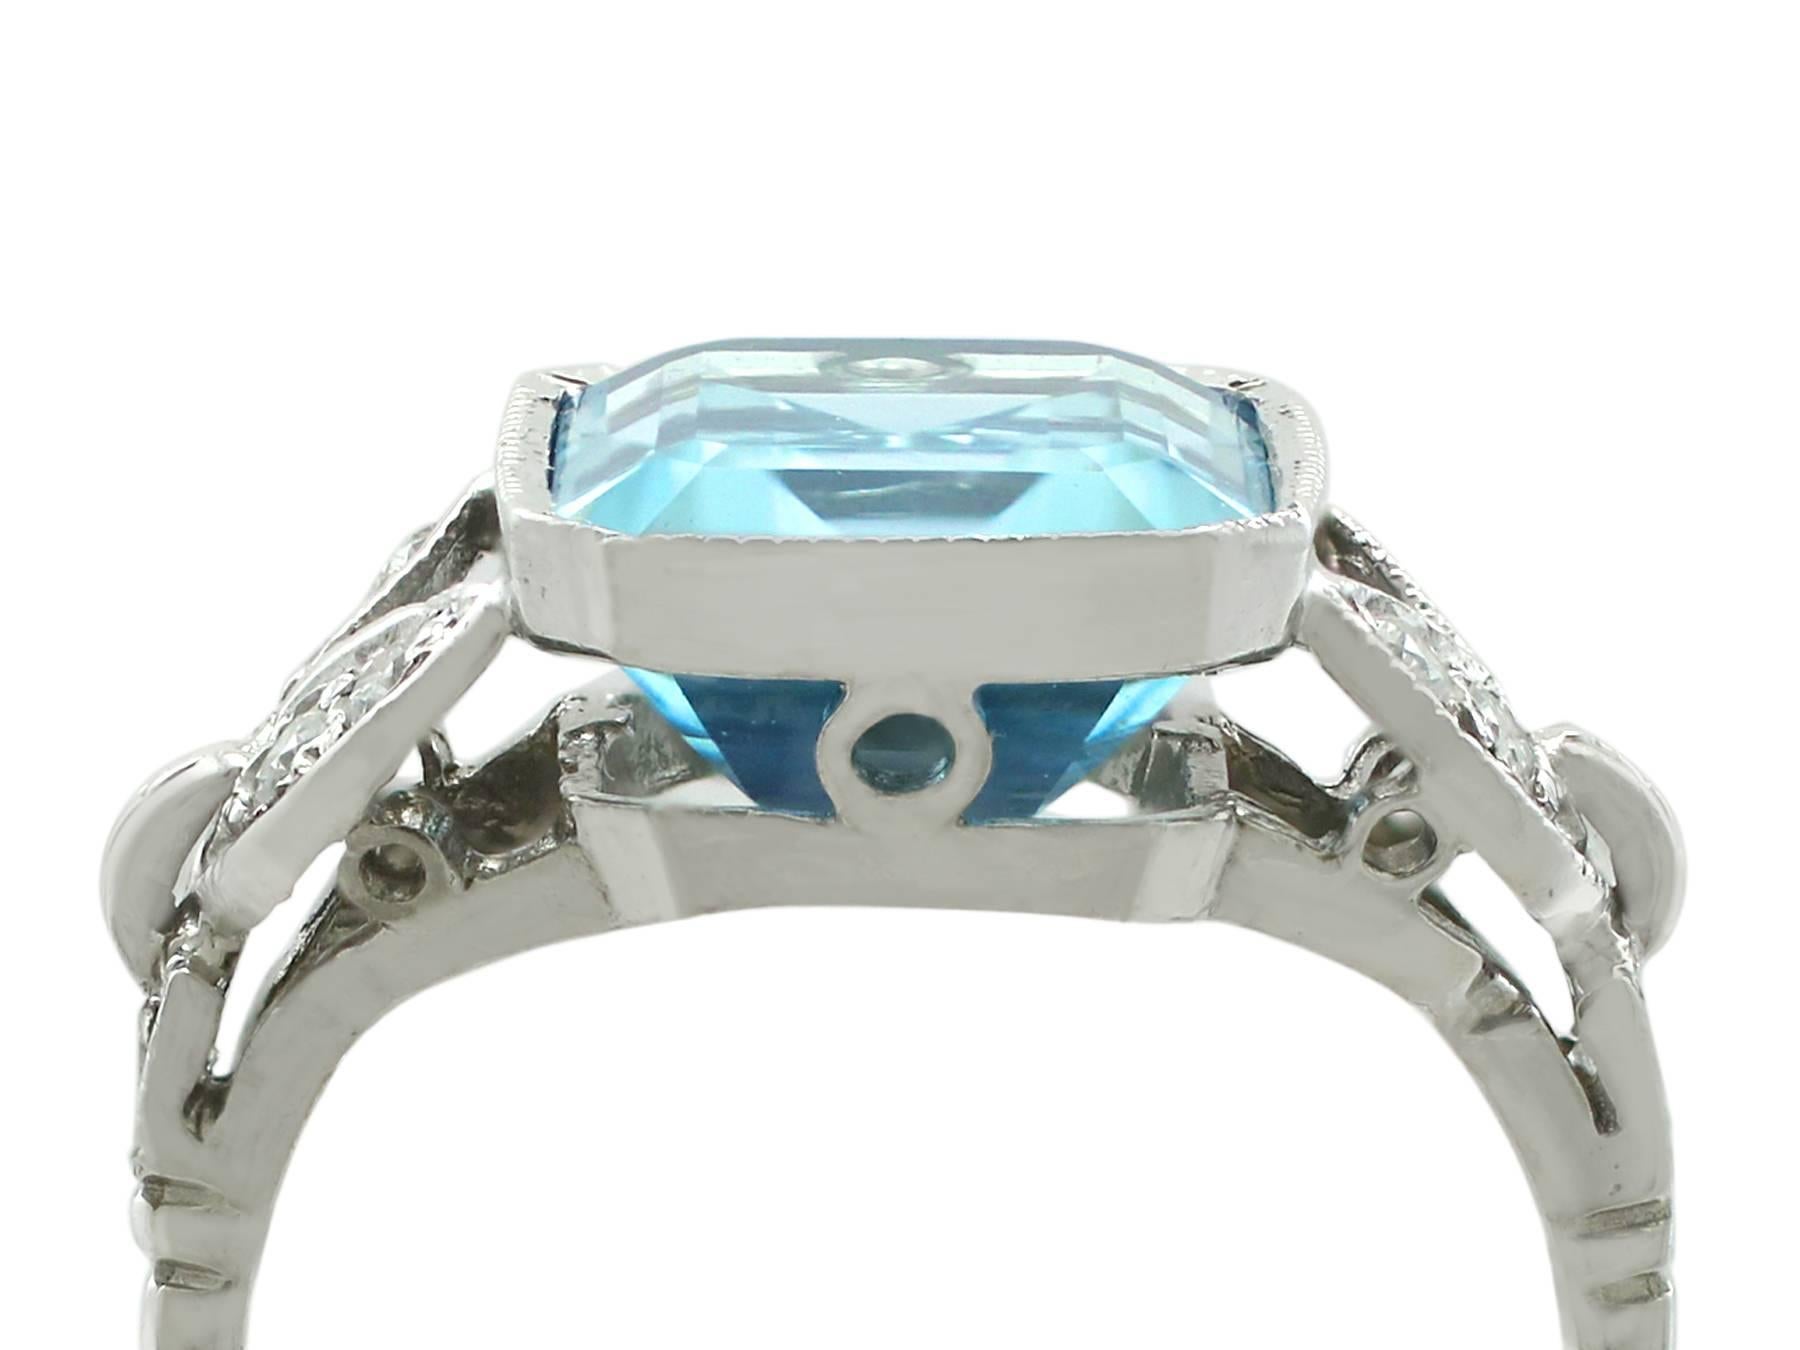 A stunning antique 3.18 Ct aquamarine and 0.12 ct diamond, 18k white gold and platinum set dress ring; part of our diverse antique jewelry collections.

This stunning, fine and impressive antique aquamarine ring has been crafted in 18k white gold